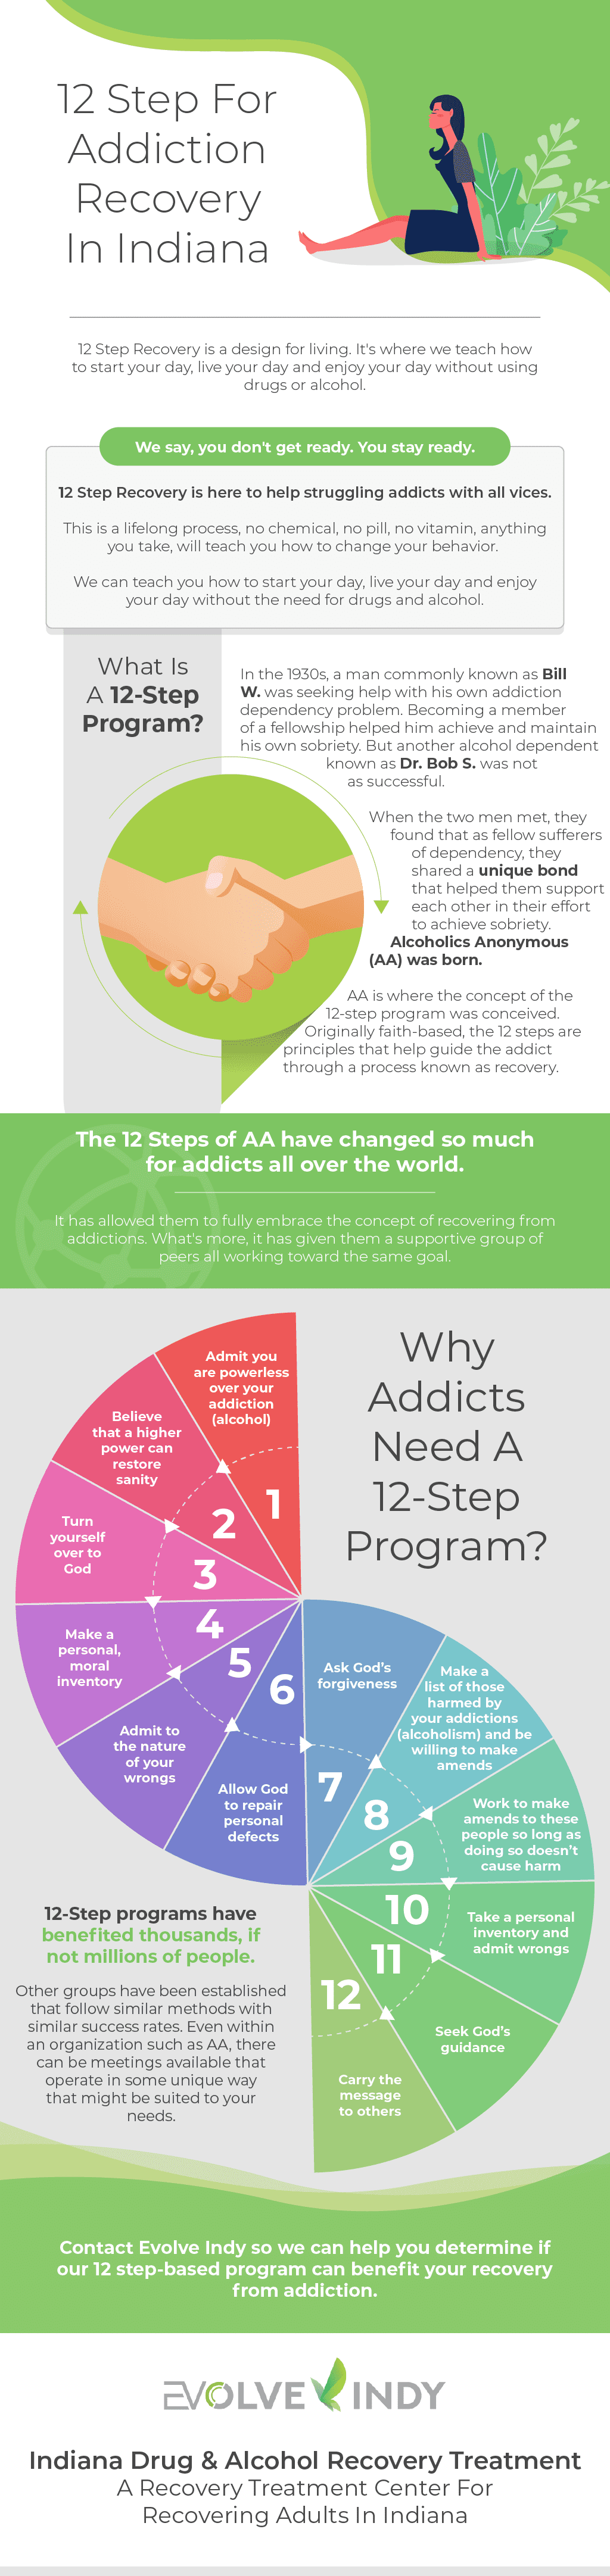 The 12 Steps of Recovery From Addiction Infographic